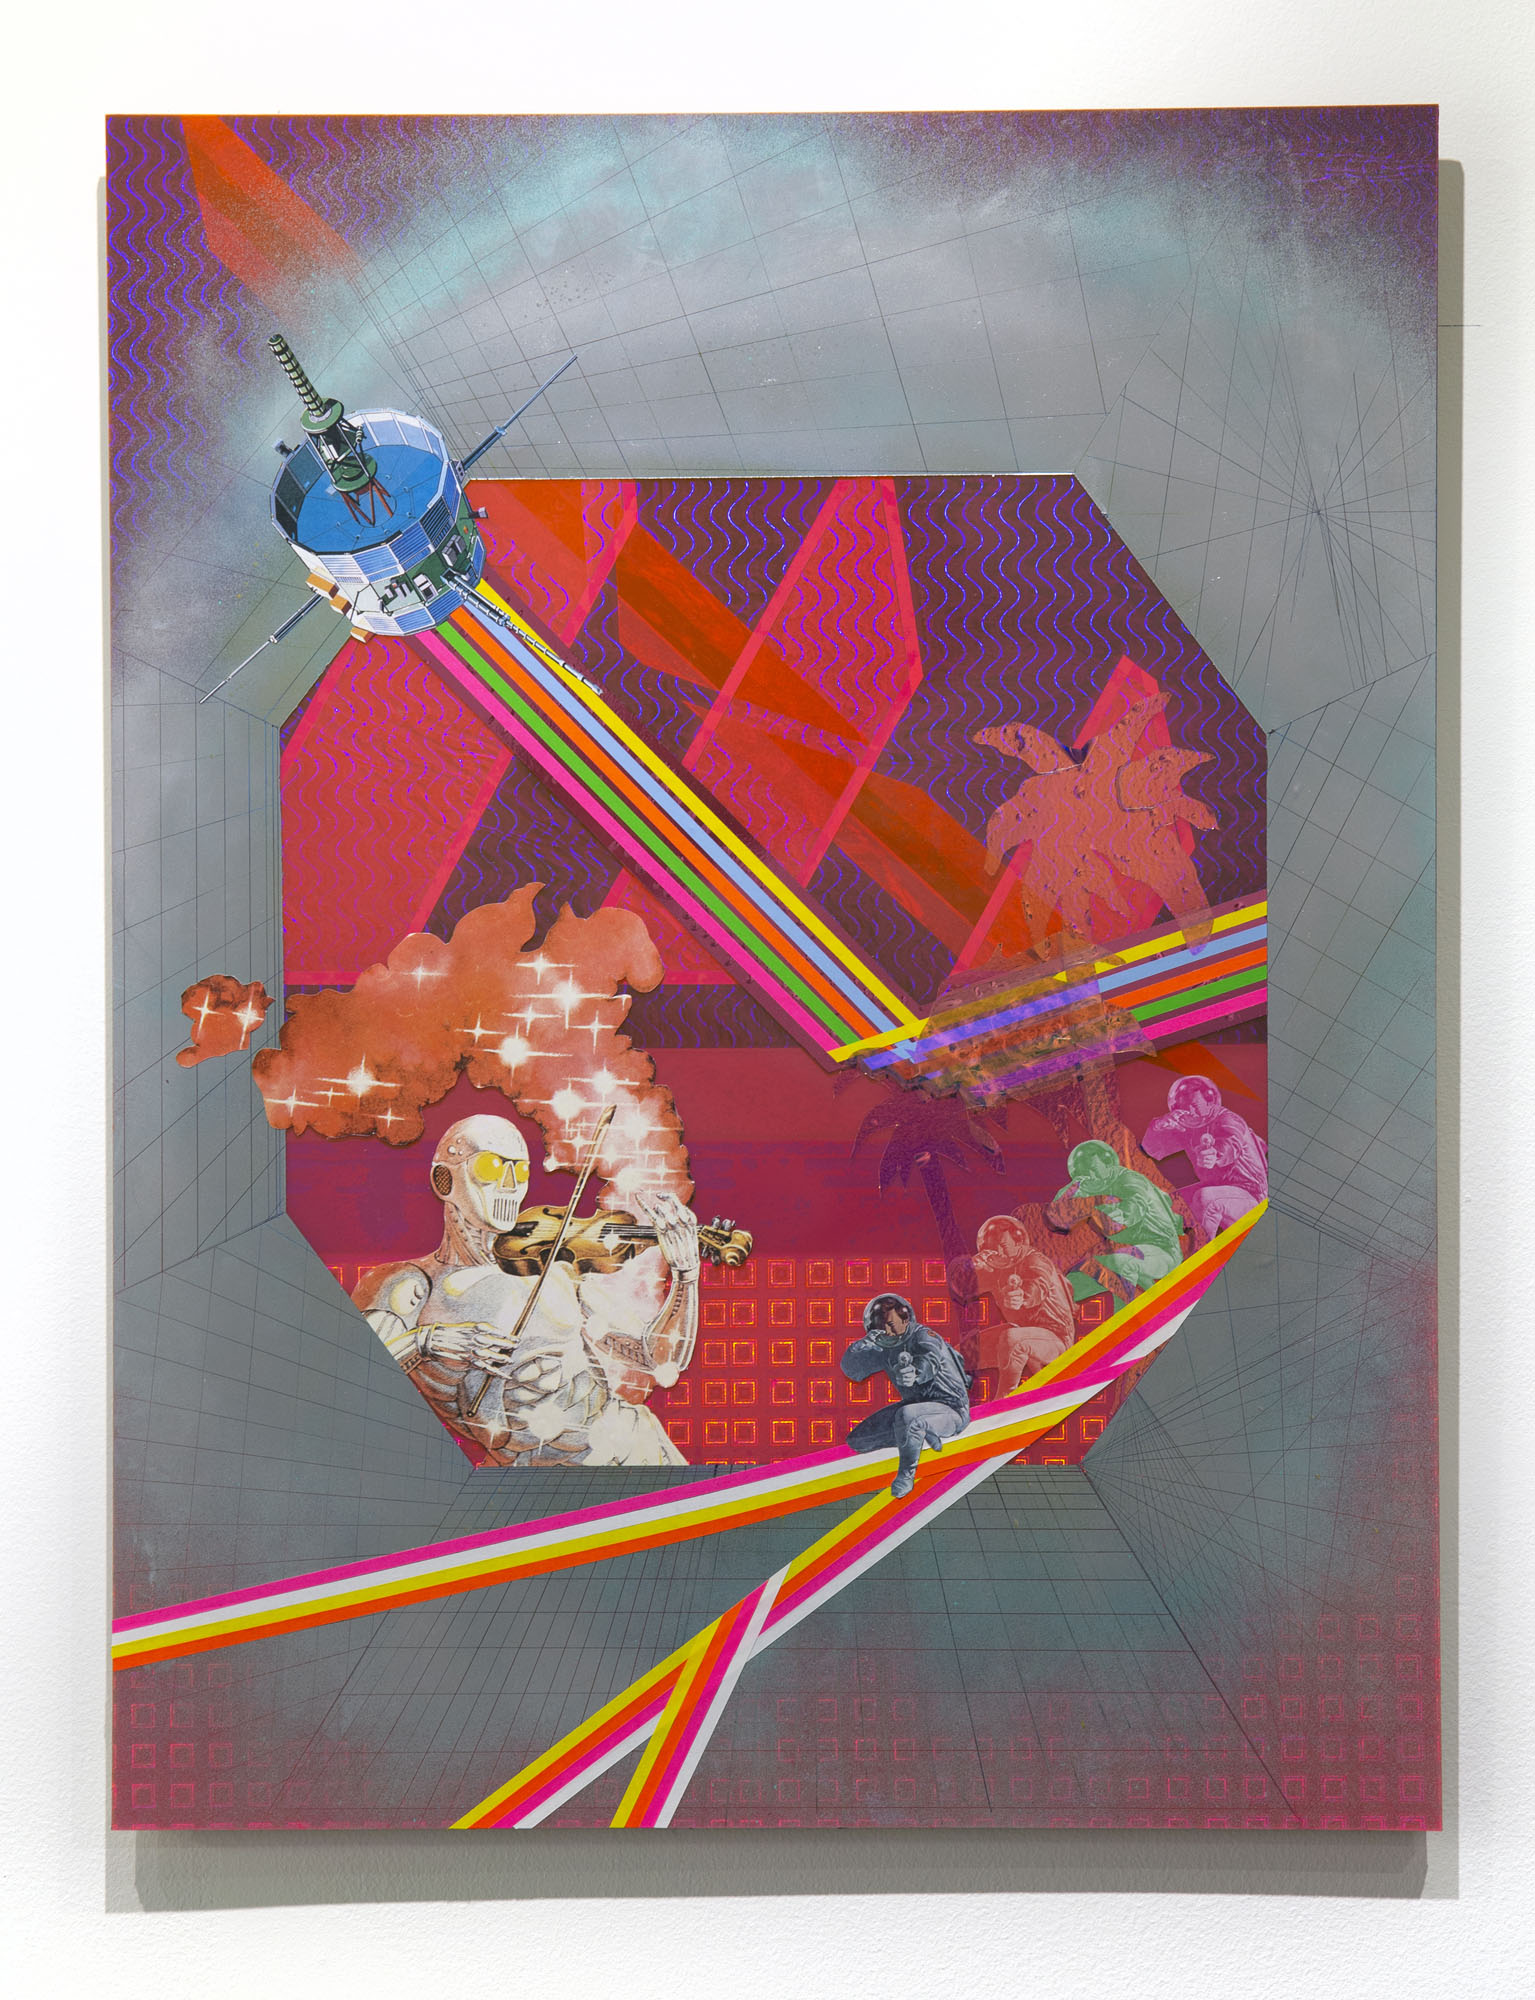    Cowboys and Indians     2018 Vinyl, tape, Mylar, cellophane, spray paint, and paper on plexiglass 31h x 24w in 